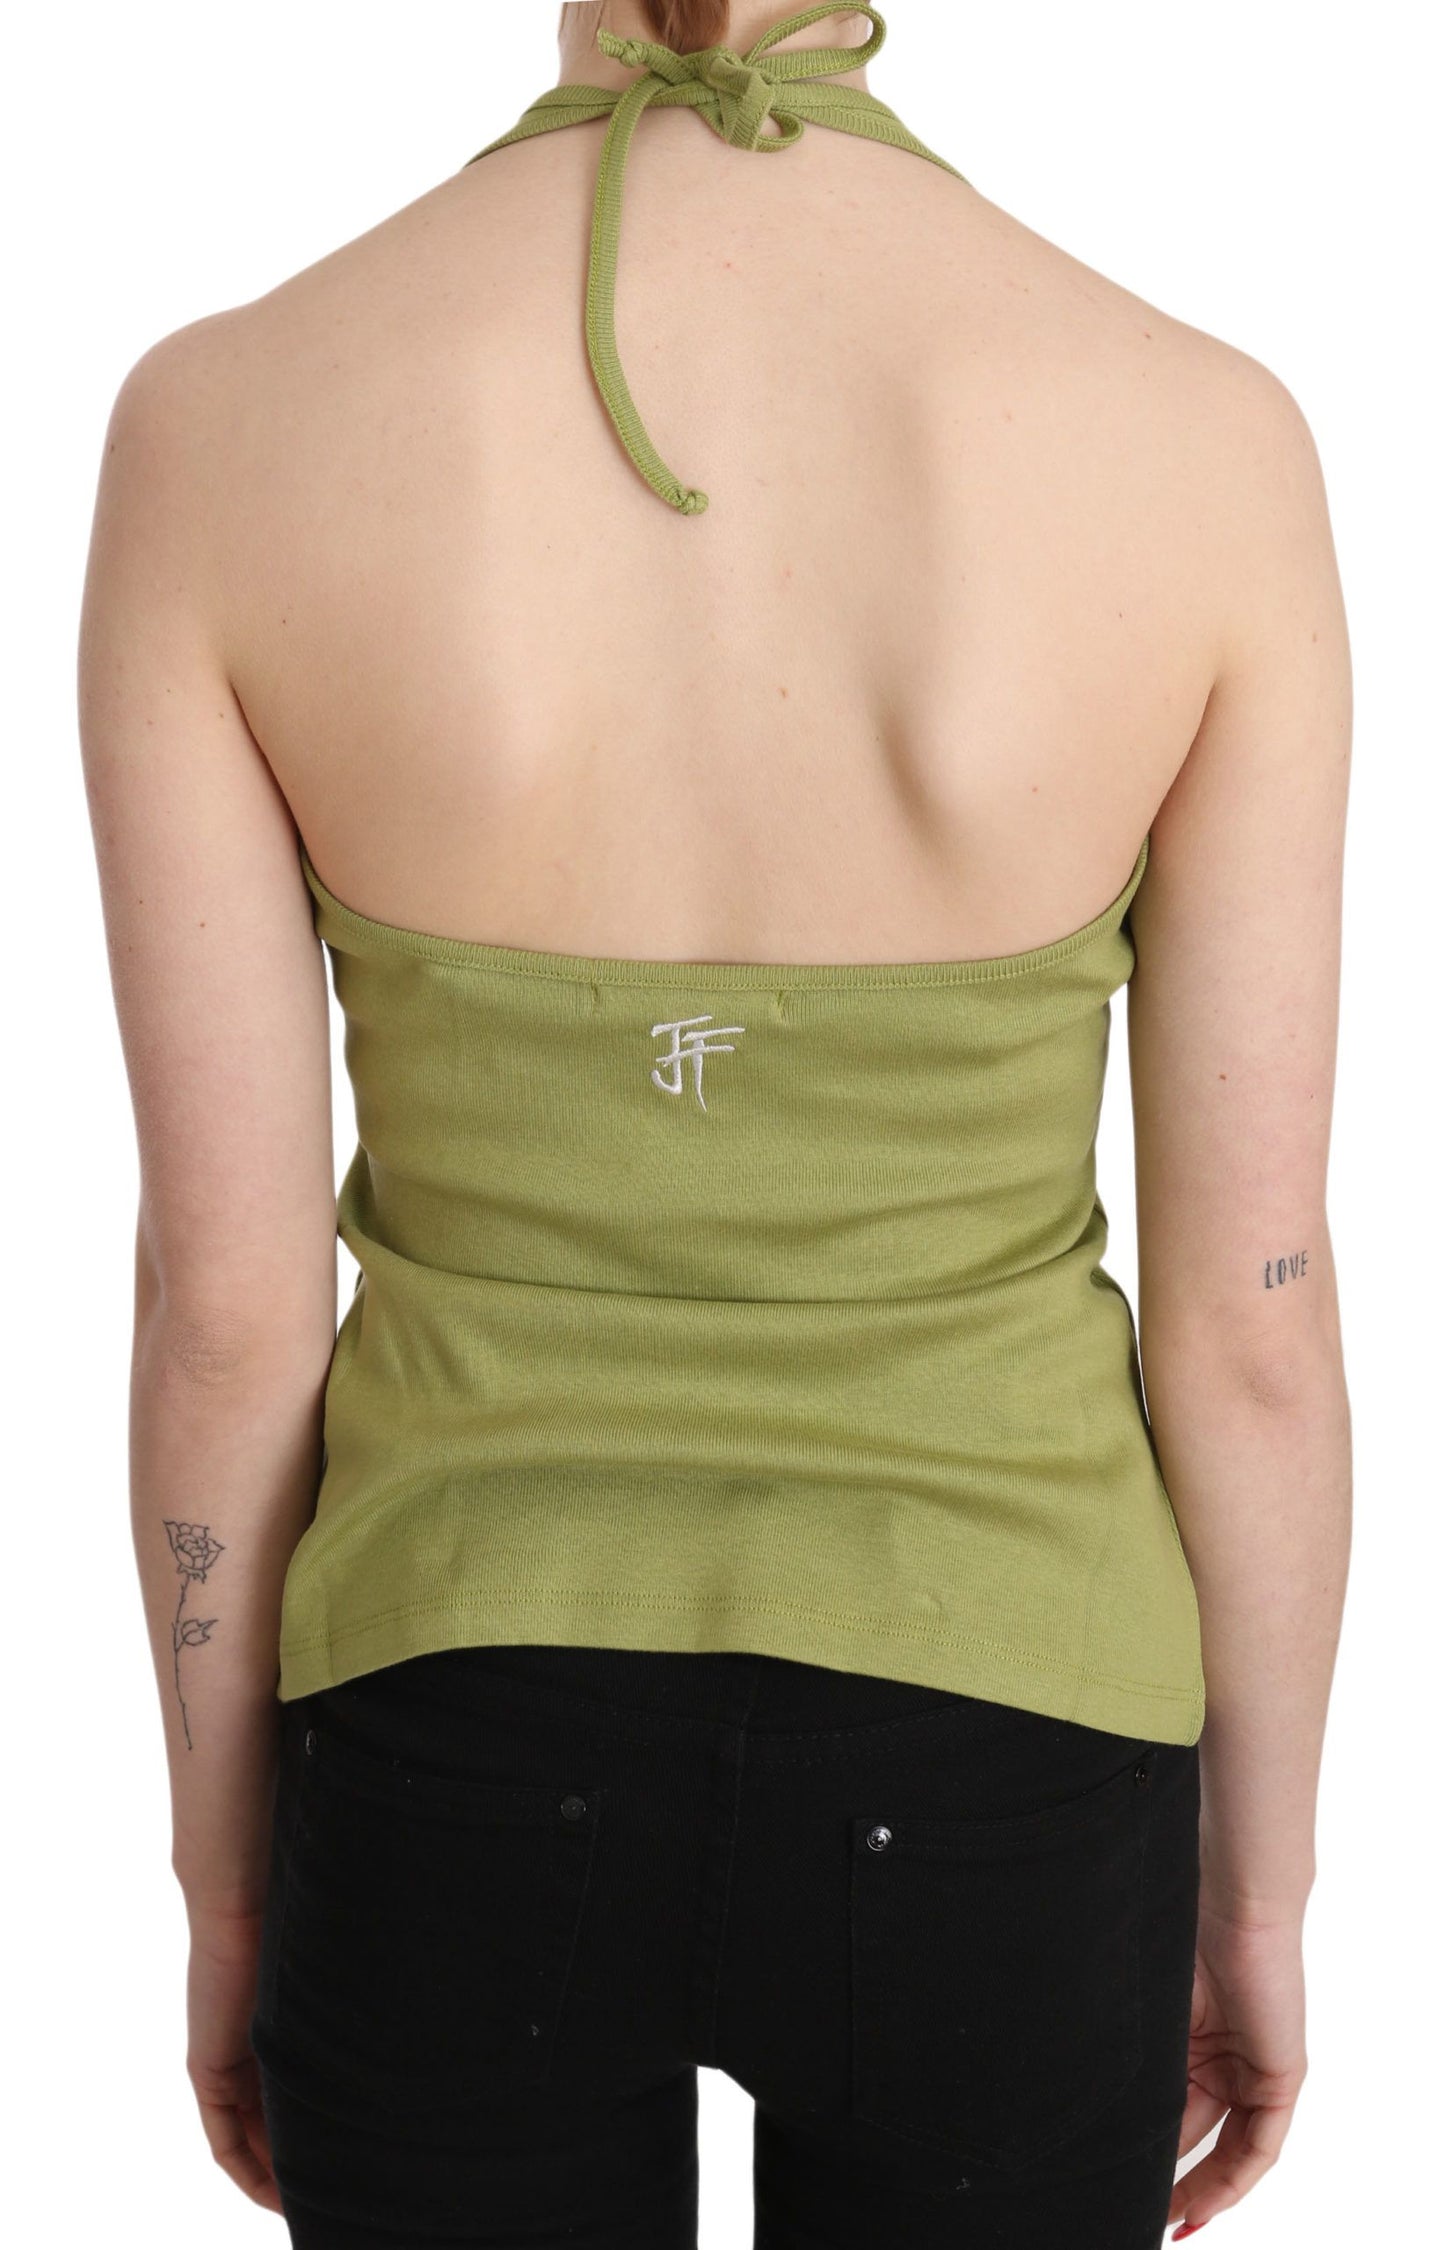 Green Halter Cotton Sleeveless Casual Tank Top Blouse - Designed by GF Ferre Available to Buy at a Discounted Price on Moon Behind The Hill Online Designer Discount Store